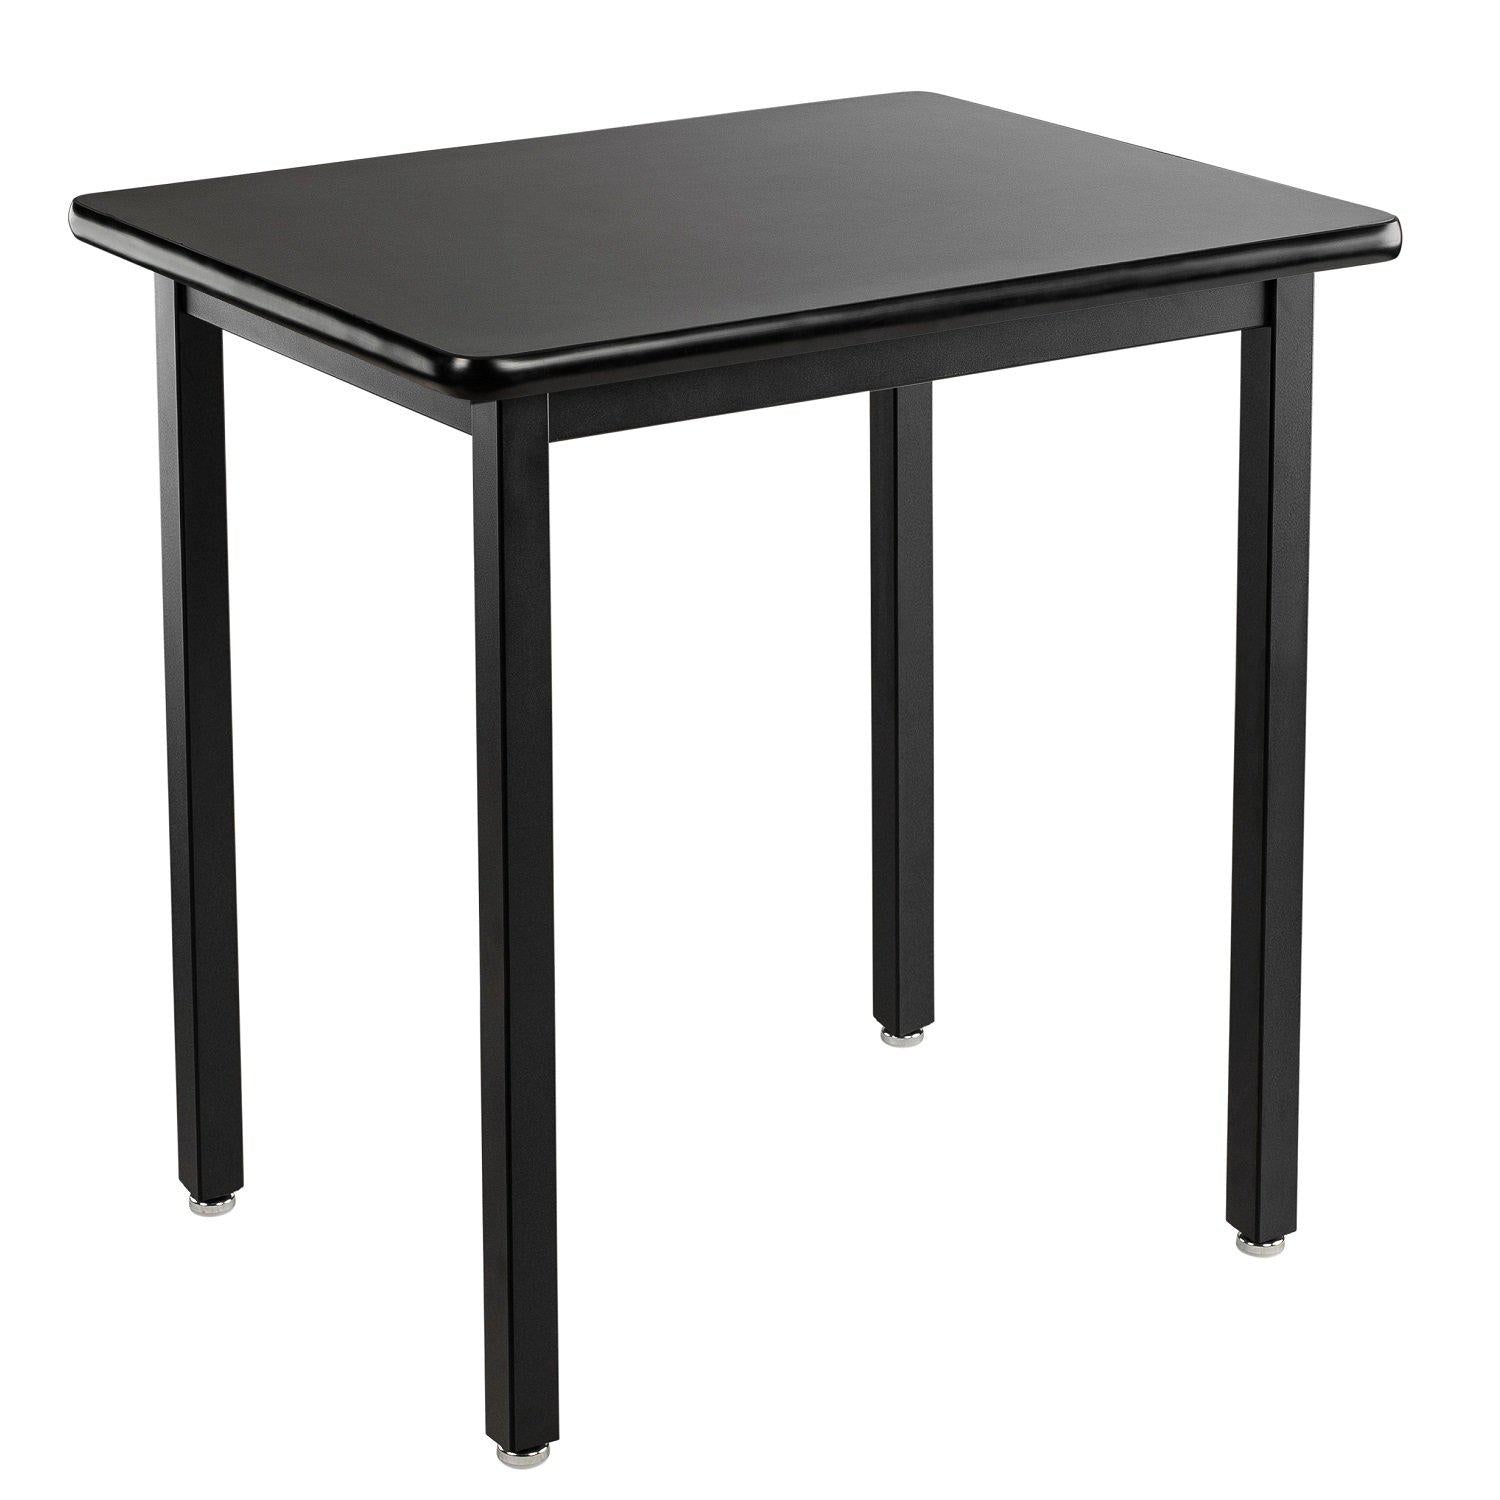 Heavy-Duty Fixed Height Utility Table, Black Frame, 24" x 30", High-Pressure Laminate Top with T-Mold Edge